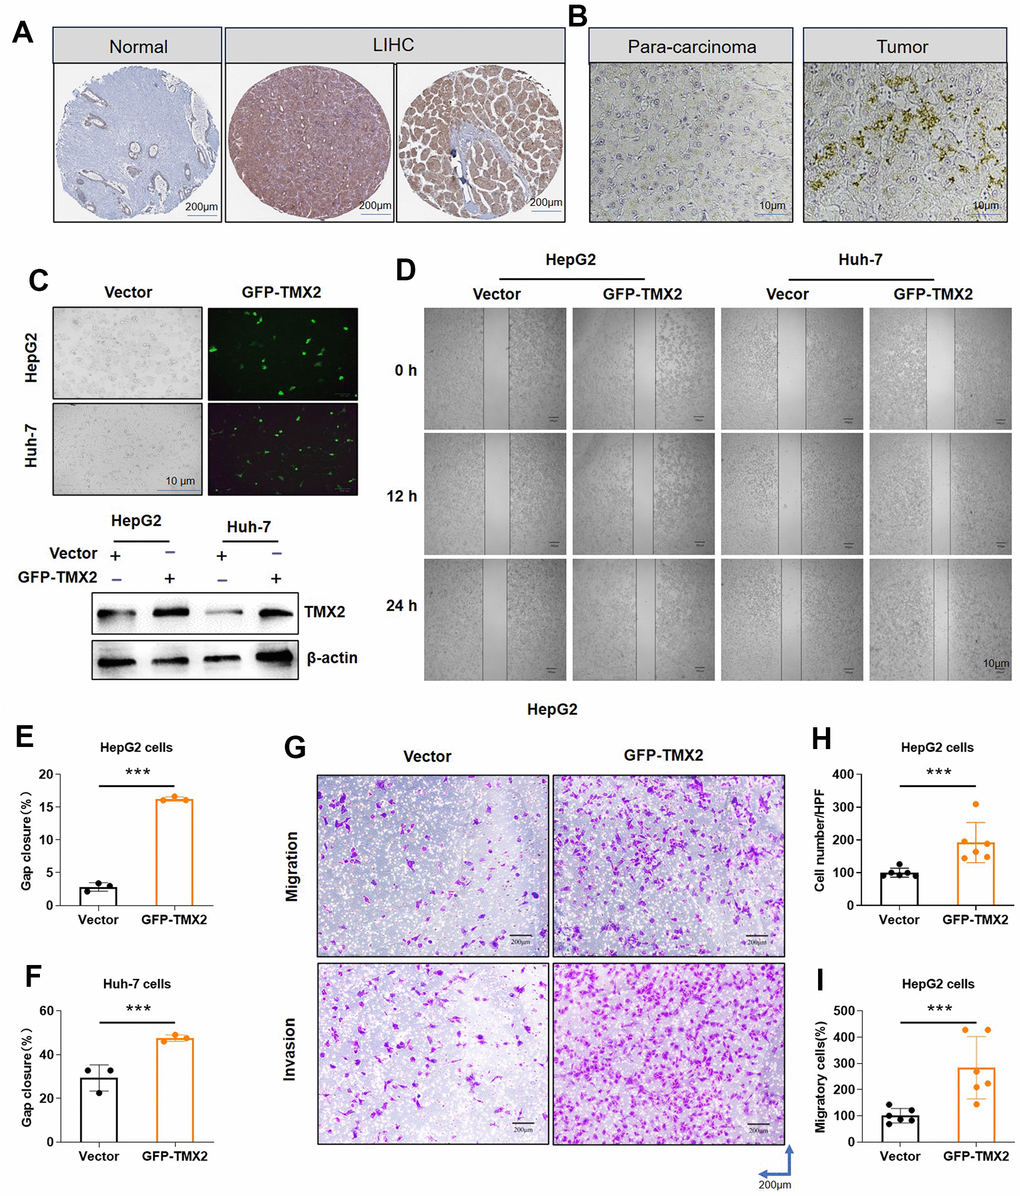 TMX2 overexpression promotes the migration and invasion of liver cancer cells in vitro. Based on the HPA database, representative immunohistochemical staining of TMX2 in normal and tumor tissues of LIHC (A). Immunohistochemical analysis of TMX2 expression intensity in liver cancer patient (B). Transfection analysis of TMX2 (C). Microscopic observations were recorded at 0, 12, and 24 h after scratching the surface of a confluent layer of the indicated HepG2 and Huh-7 cells (D). Quantitative analysis of wound healing percentage in HepG2 cells (E). Quantitative analysis of wound healing percentage in Huh-7 cells (F). The effects of TMX2 on cell migration and invasion were examined by transwell assays in HepG2 cells (G). Quantitative analysis of cell migration in HepG2 cells (H). Quantitative analysis of cell invasion in HepG-2 cells (I). *p 